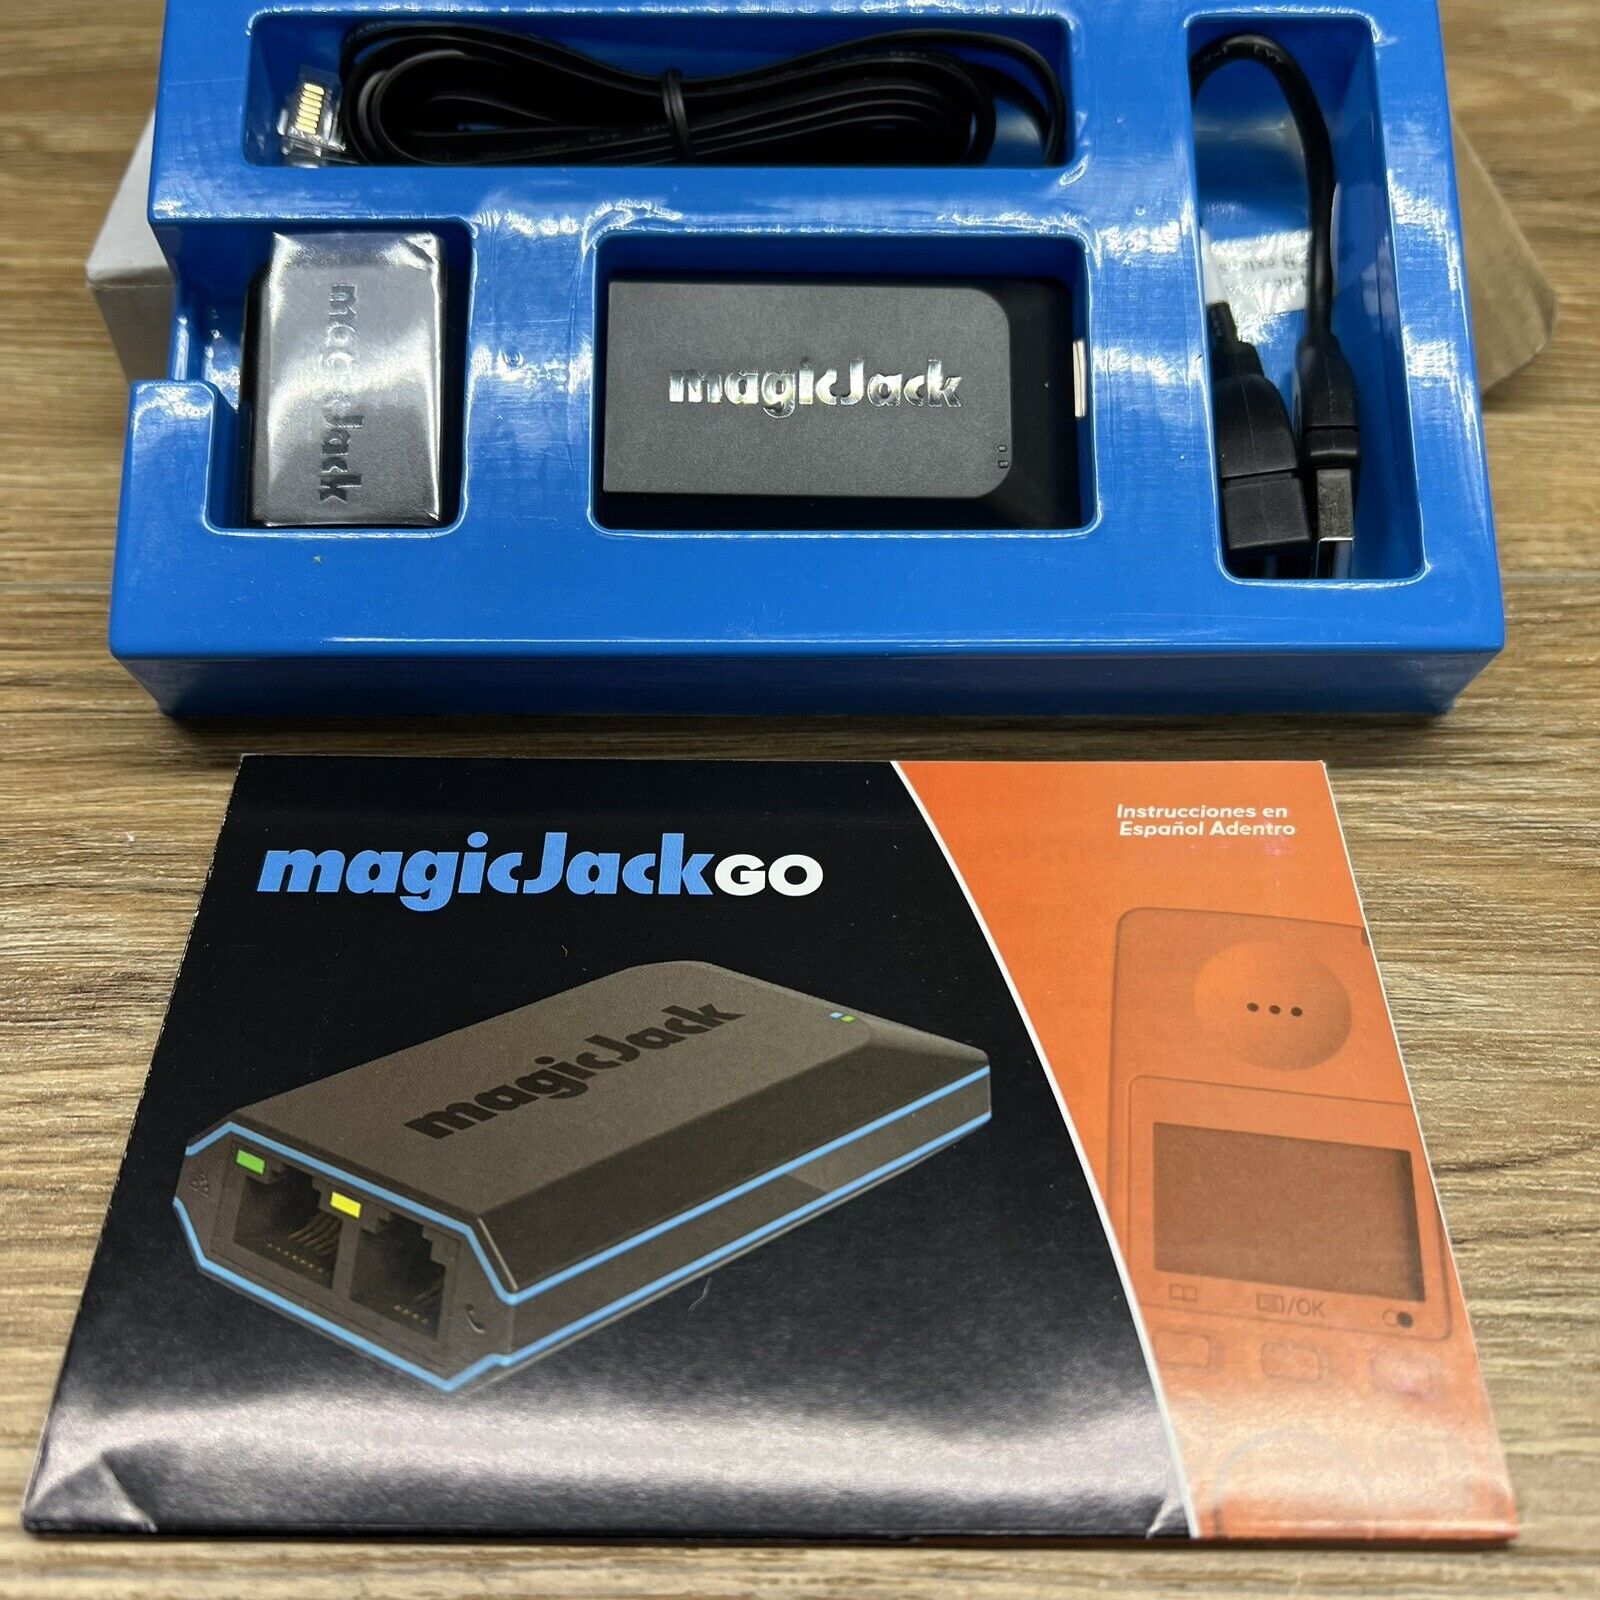 NEW MAGIC JACK GO Smart Home/Business On The Go Digital Phone Service New In Box